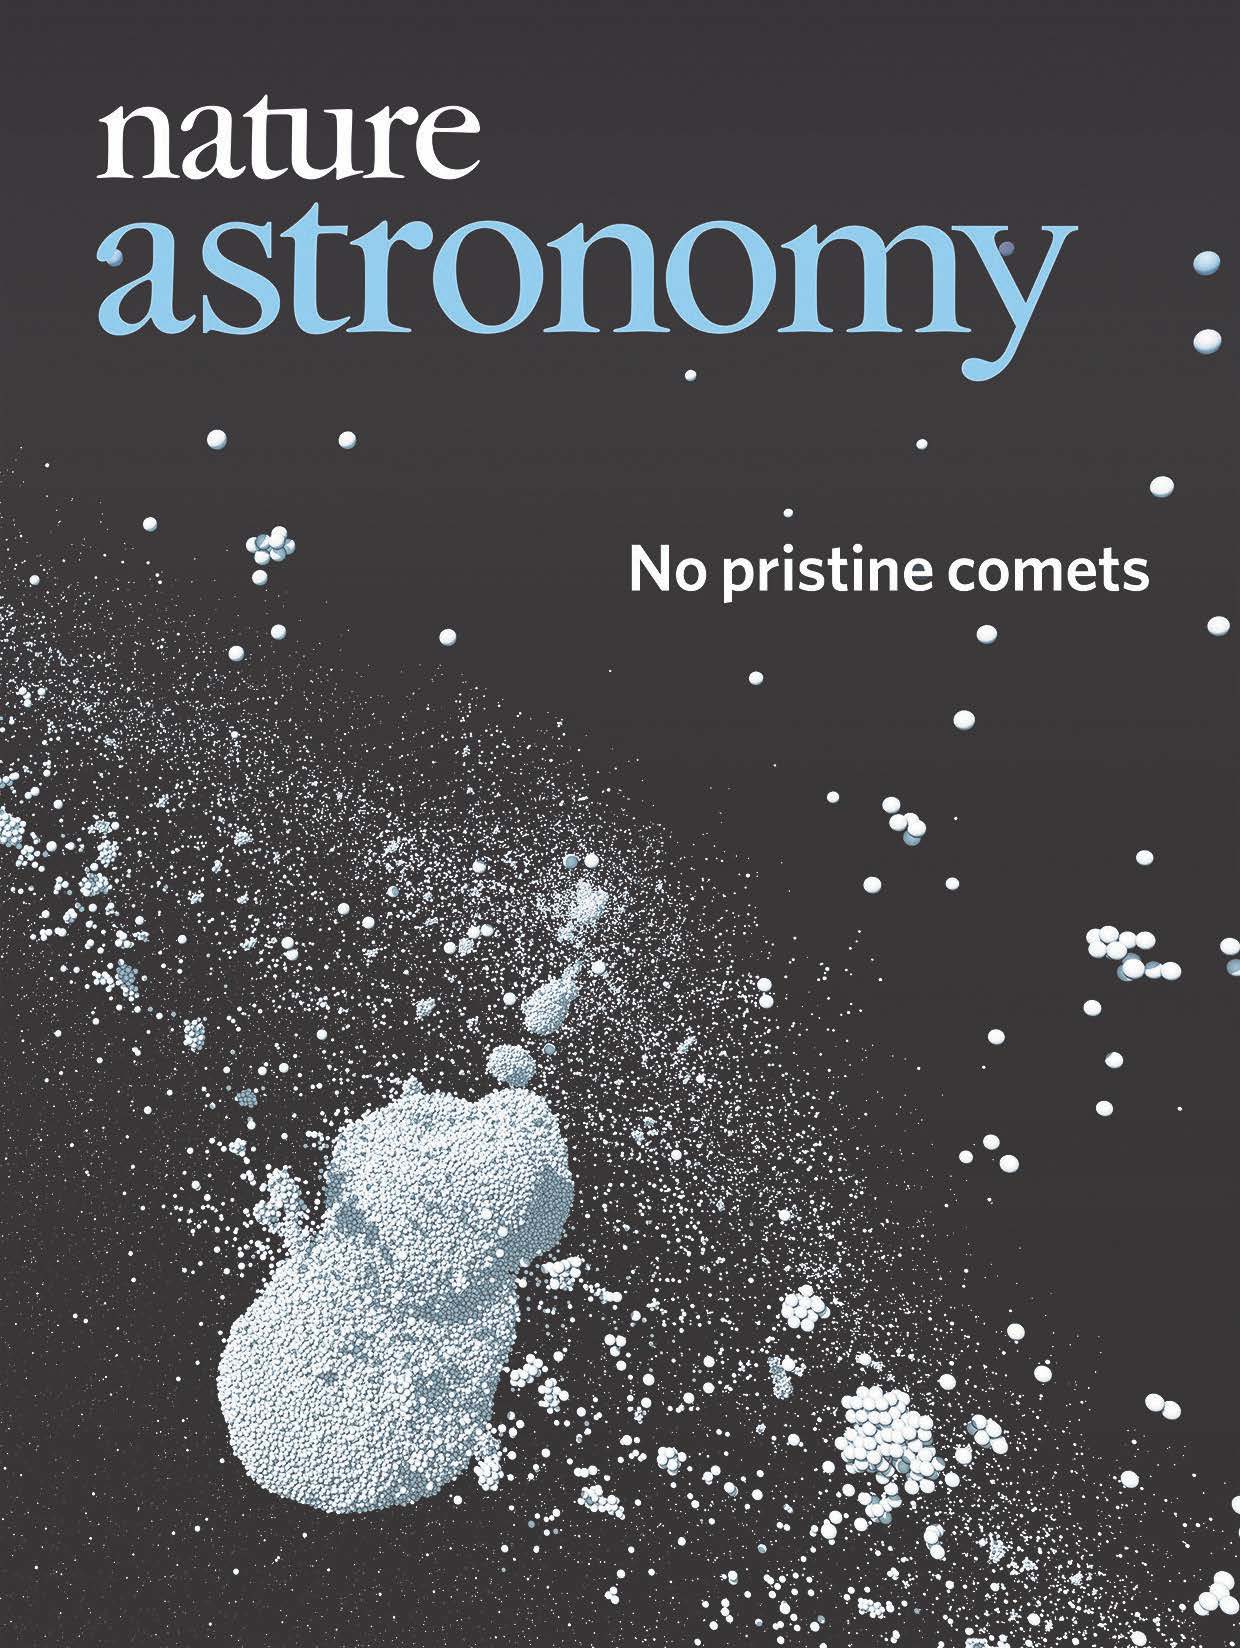 Cover of the journal Nature Astronomy showing the outcome of one of the GRADYN simulations of comet collision and re-accumulation, which reproduces the shape of the comet 67P and explains the formation of comets with two lobes. 